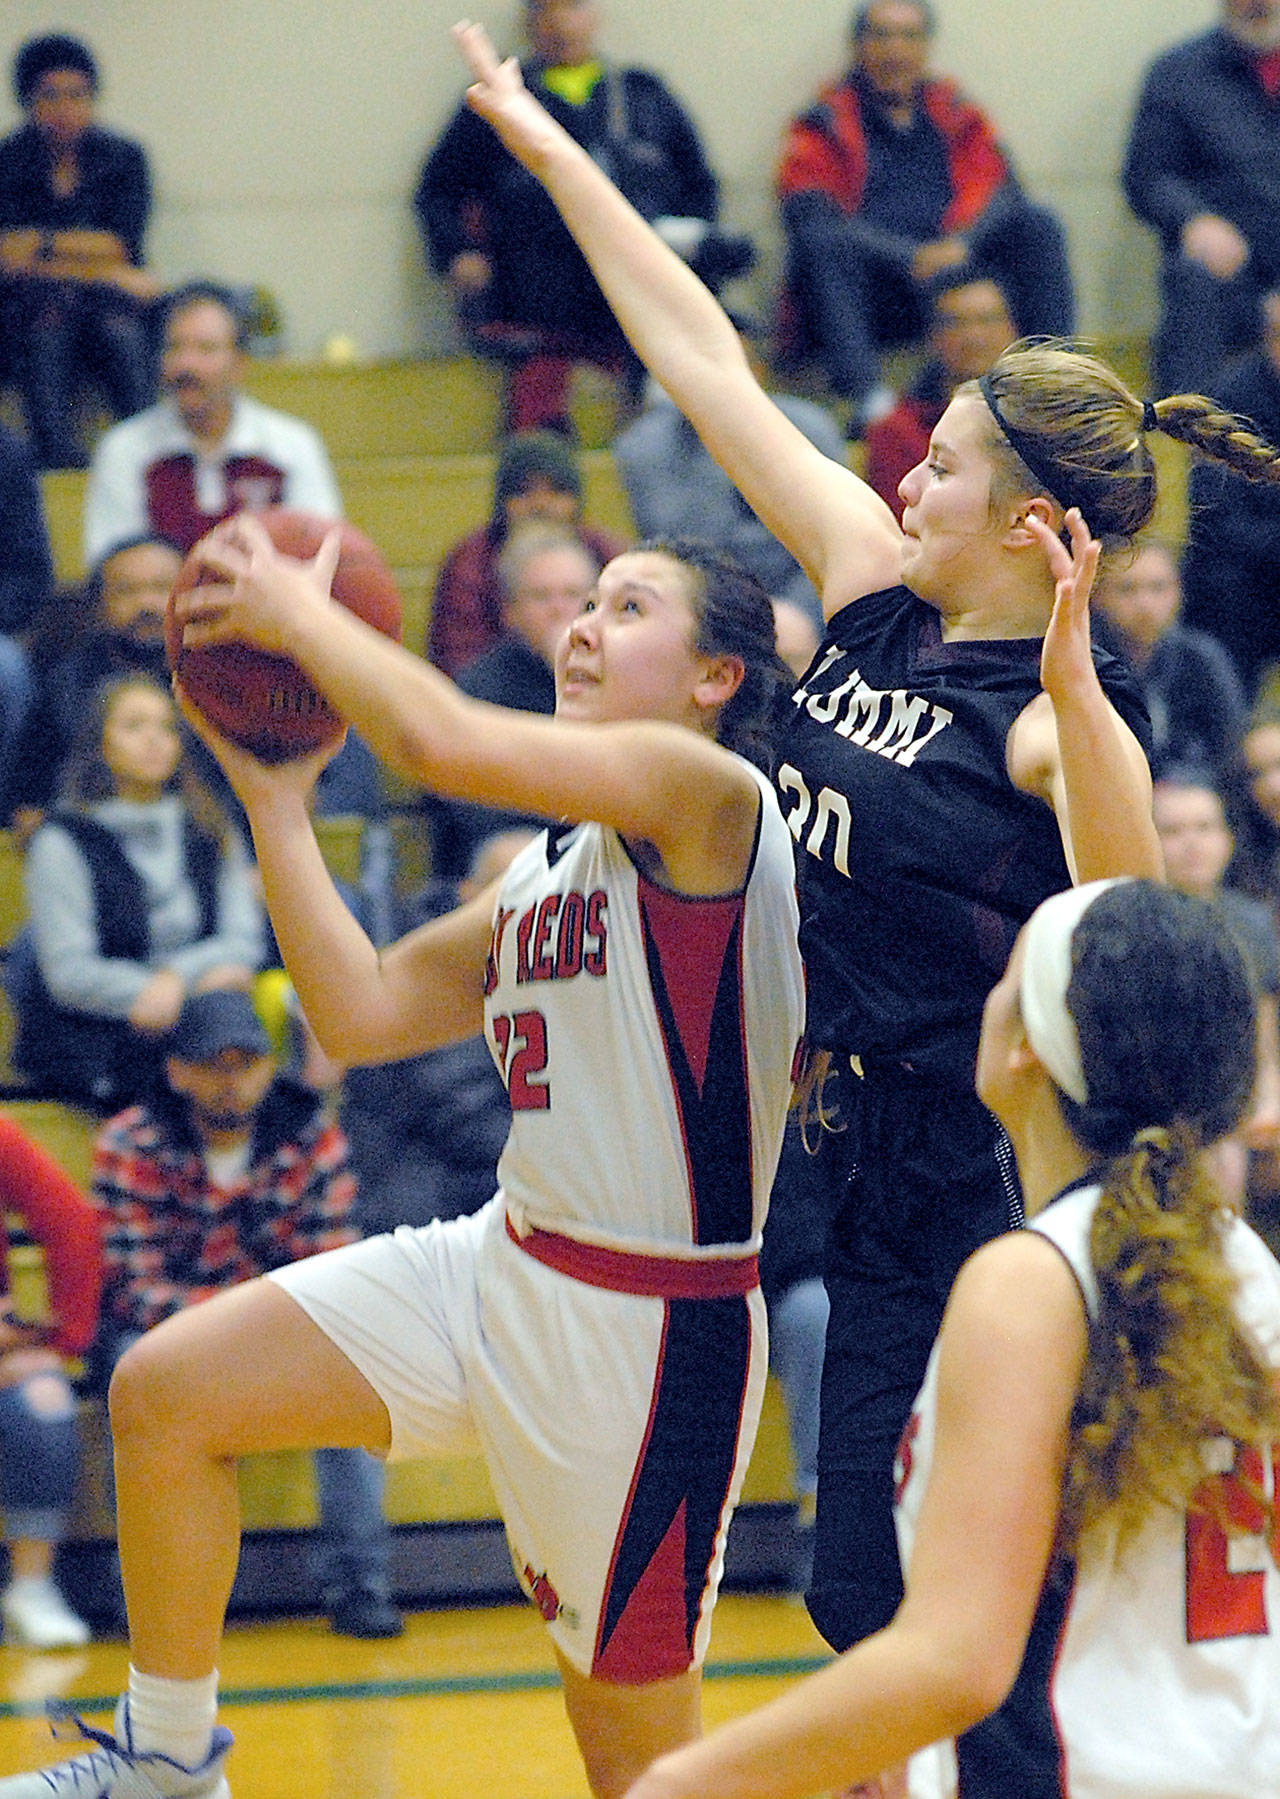 Neah Bay’s Ruth Moss, left, goes for a layup as Lummi’s Shelby Jacobs defends the lane in the third quarter on Tuesday night in Port Angles. In the forground is Moss’s teammate, Patience Swan.                                Keith Thorpe/Peninsula Daily News